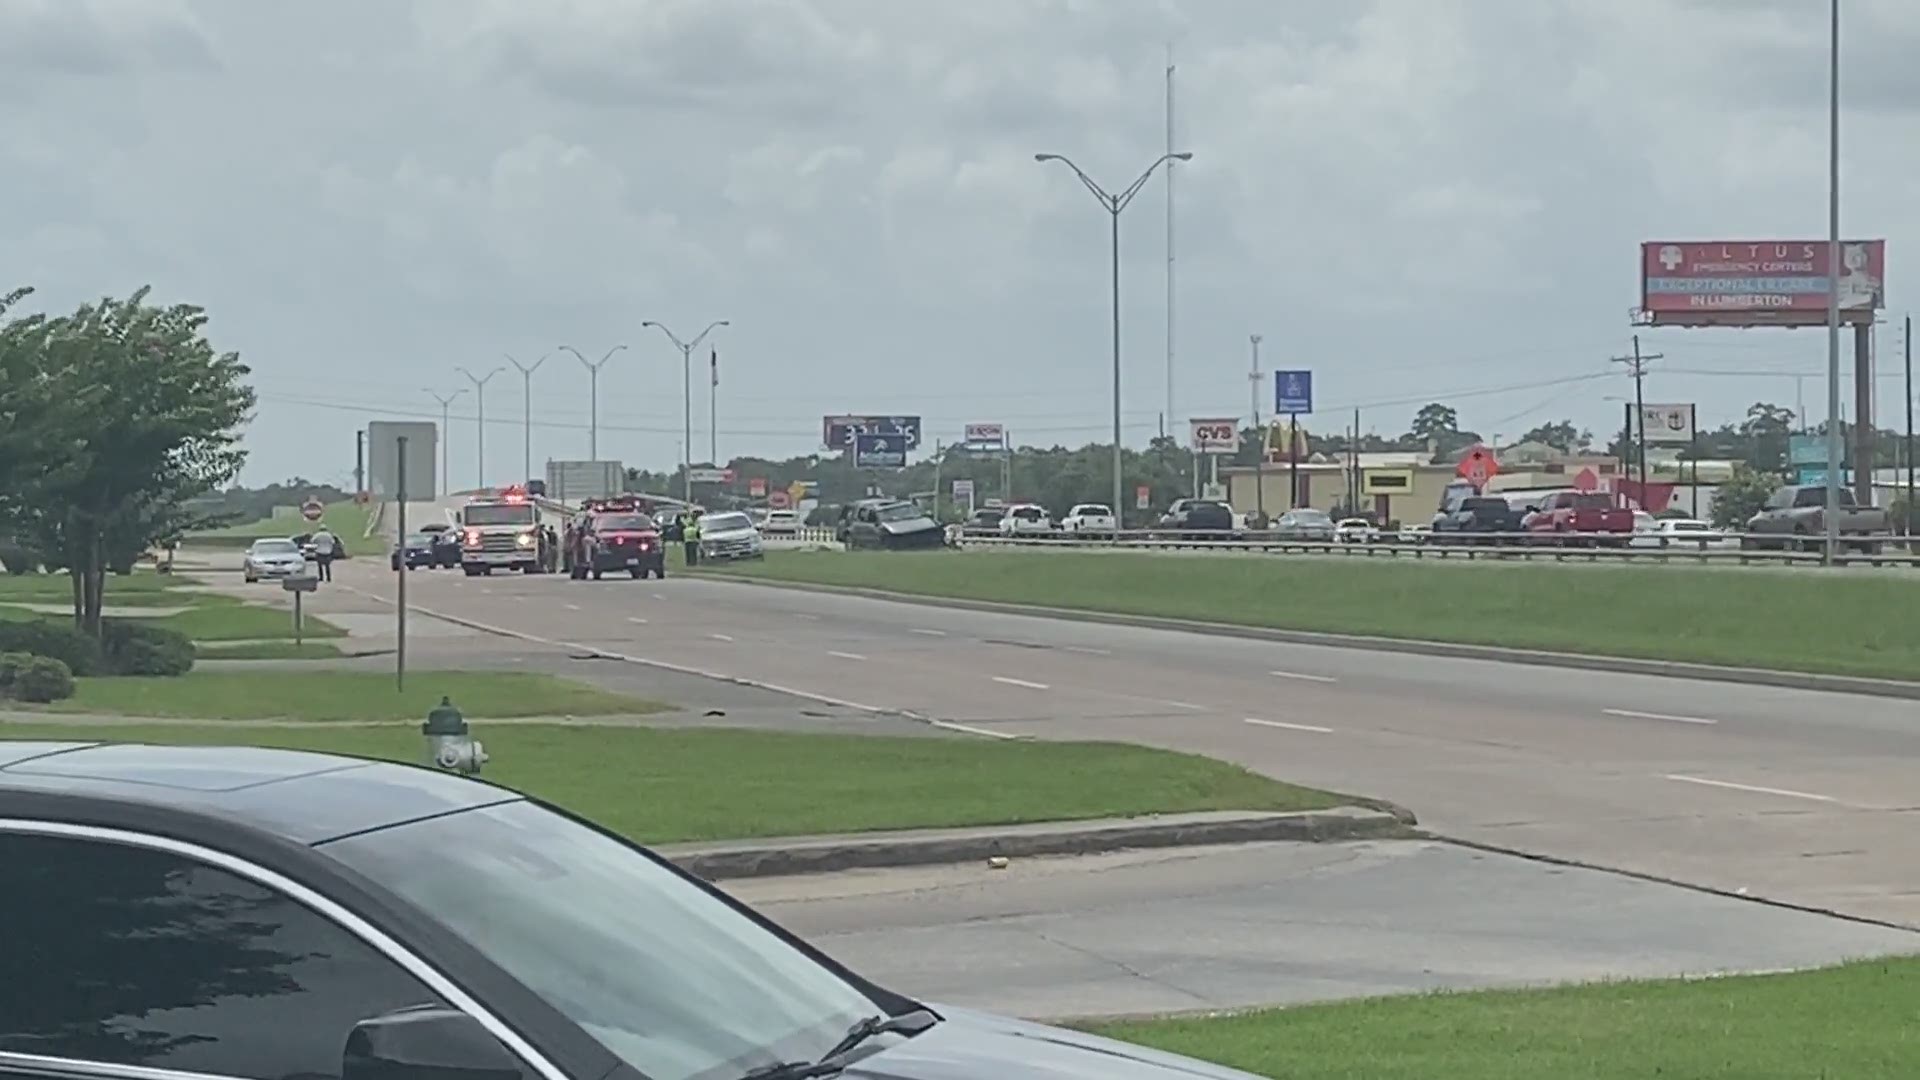 Beaumont Police and Beaumont firefighters have responded to a major wreck along Eastex Freeway near Parkdale Mall that has shut down the highway.